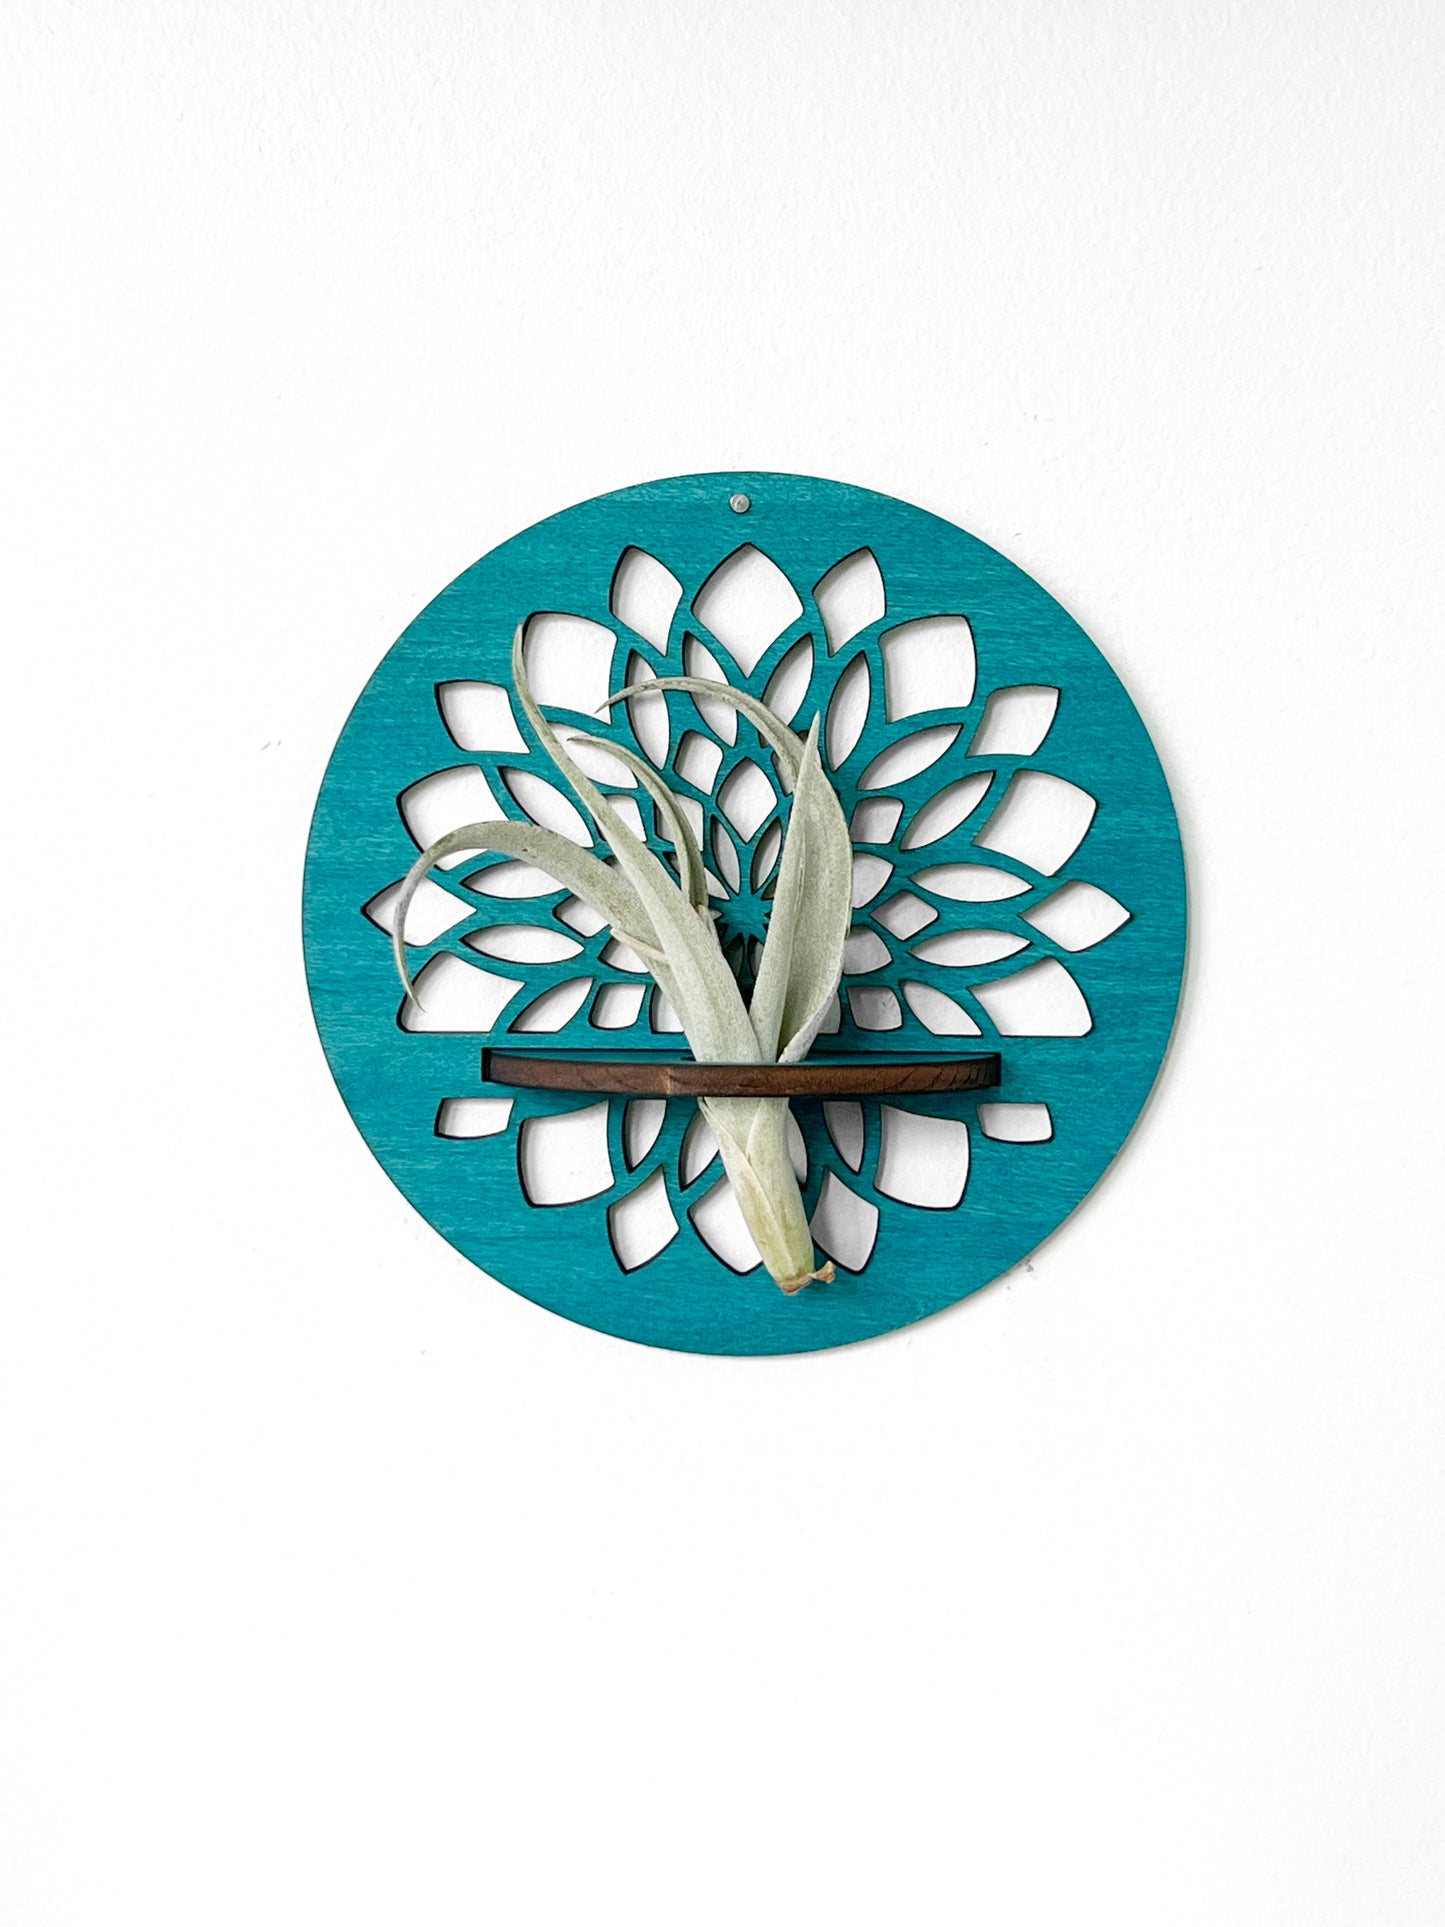 Wood Round Ocean Wave Beach, Mandala Flower or Sunbeam Air Plant Holder, Wall Hanging Modern Boho Design, Unique Display for Plant Lovers, Present for Mom, Garden Gift